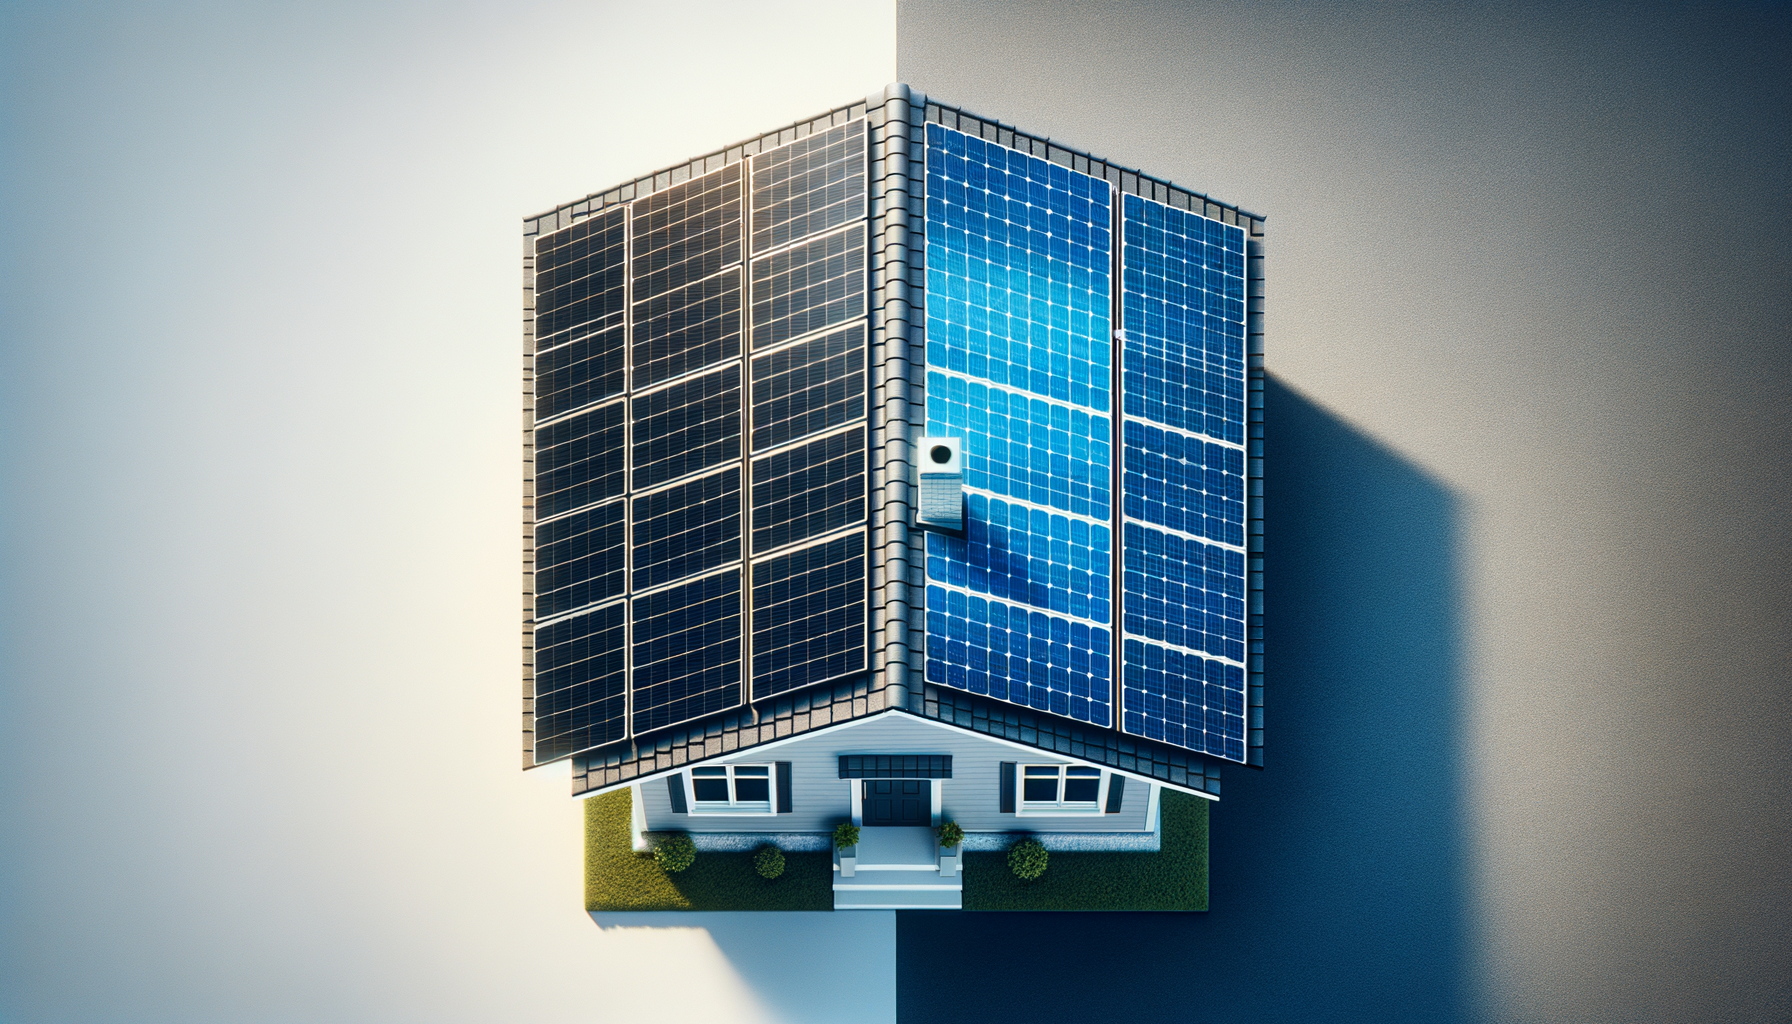 ALT: An array of different solar panels on a house roof showing diversity in appearance and design